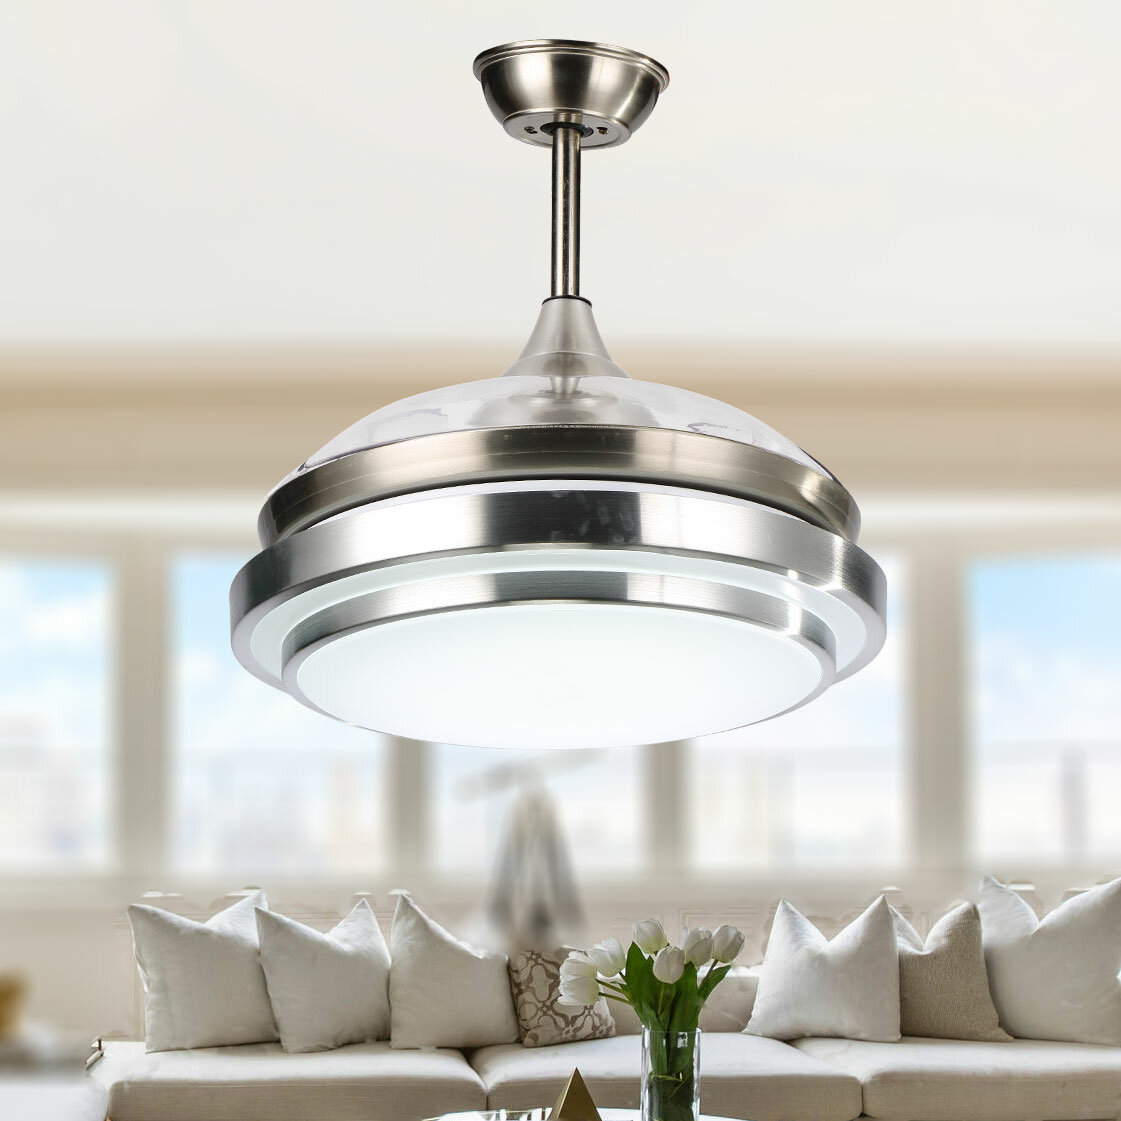 Details about   42" Ceiling Fan Light Retractable 4 Blade LED Chandelier Dimmable W/Remote USA 